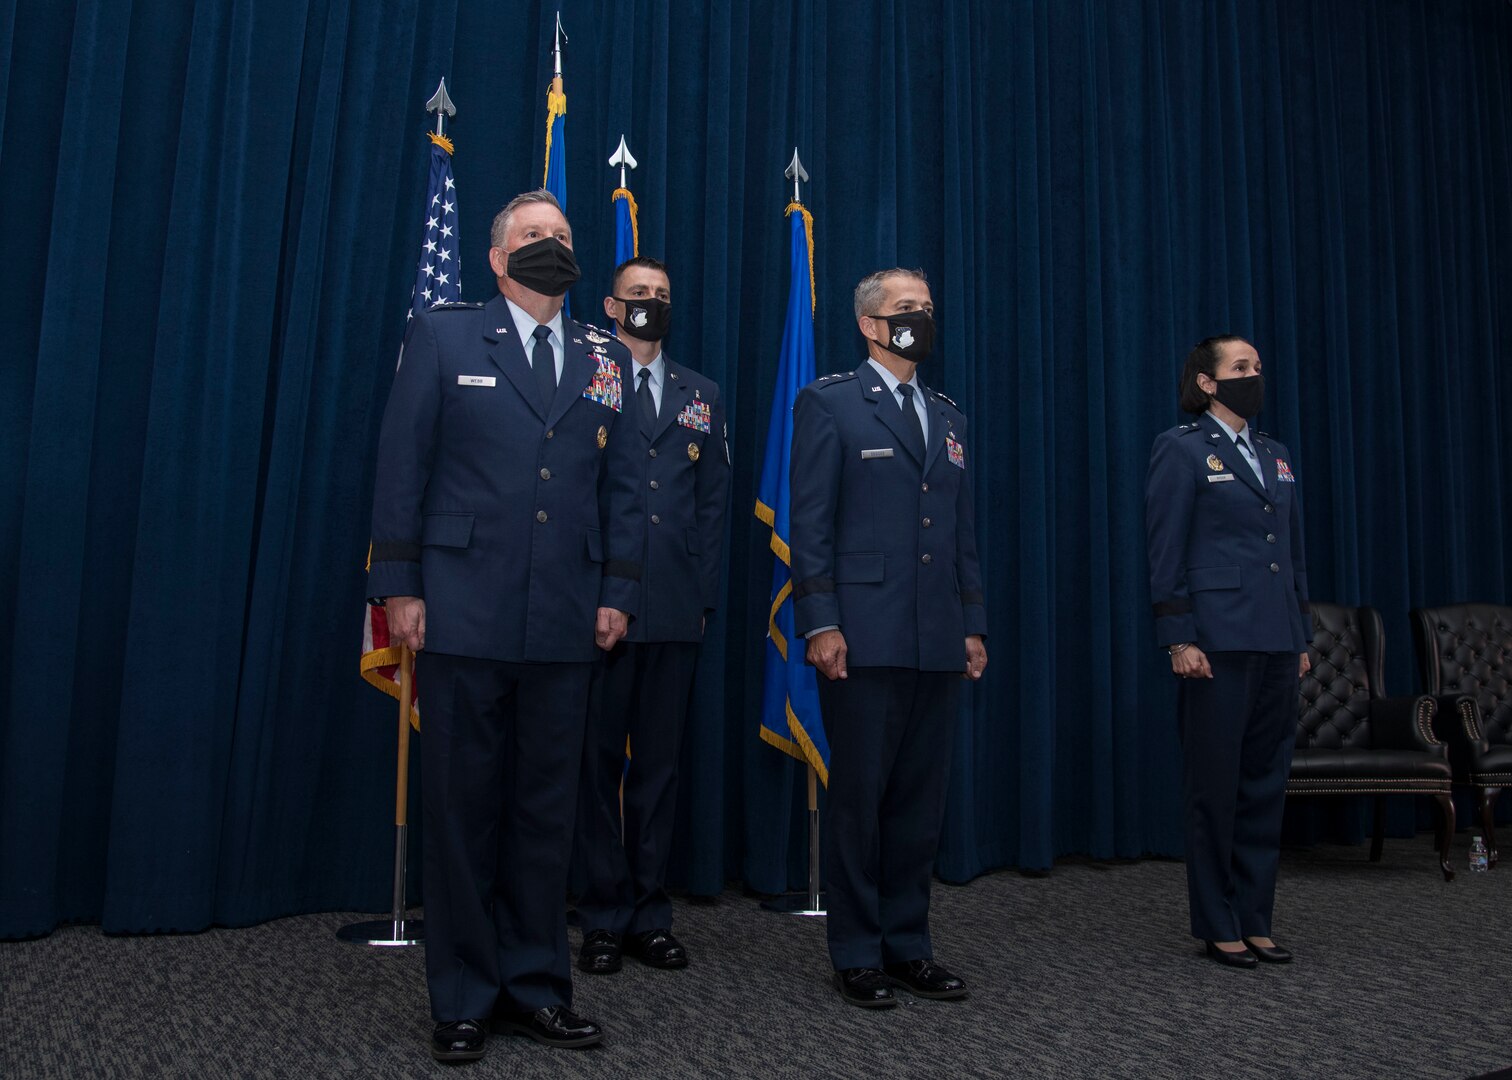 Maj. Gen. John J. DeGoes relinquished command of the 59th Medical Wing to Brig. Gen. Jeannine Ryder during a change of command ceremony at the Inter-American Air Forces Academy auditorium here April 29, 2021.